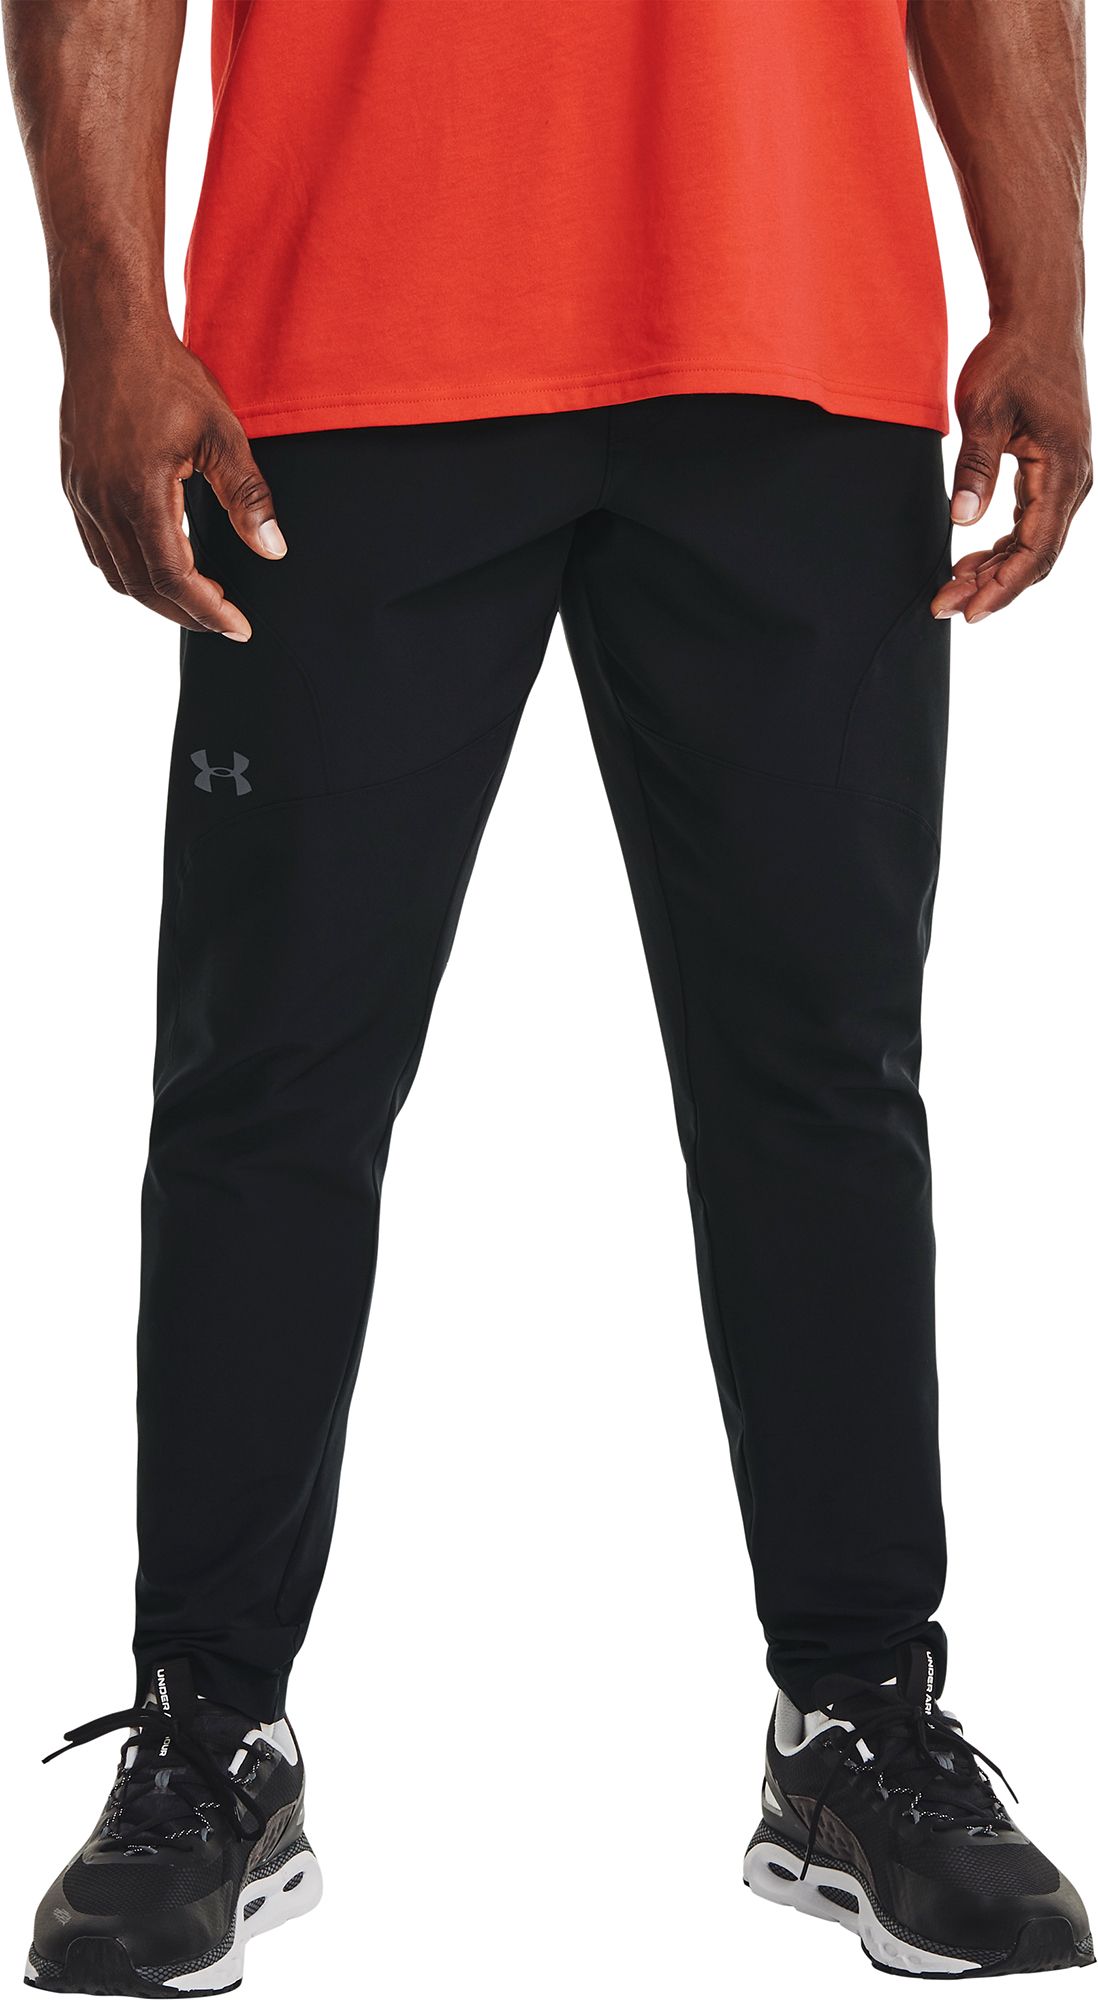 under armor tapered pants